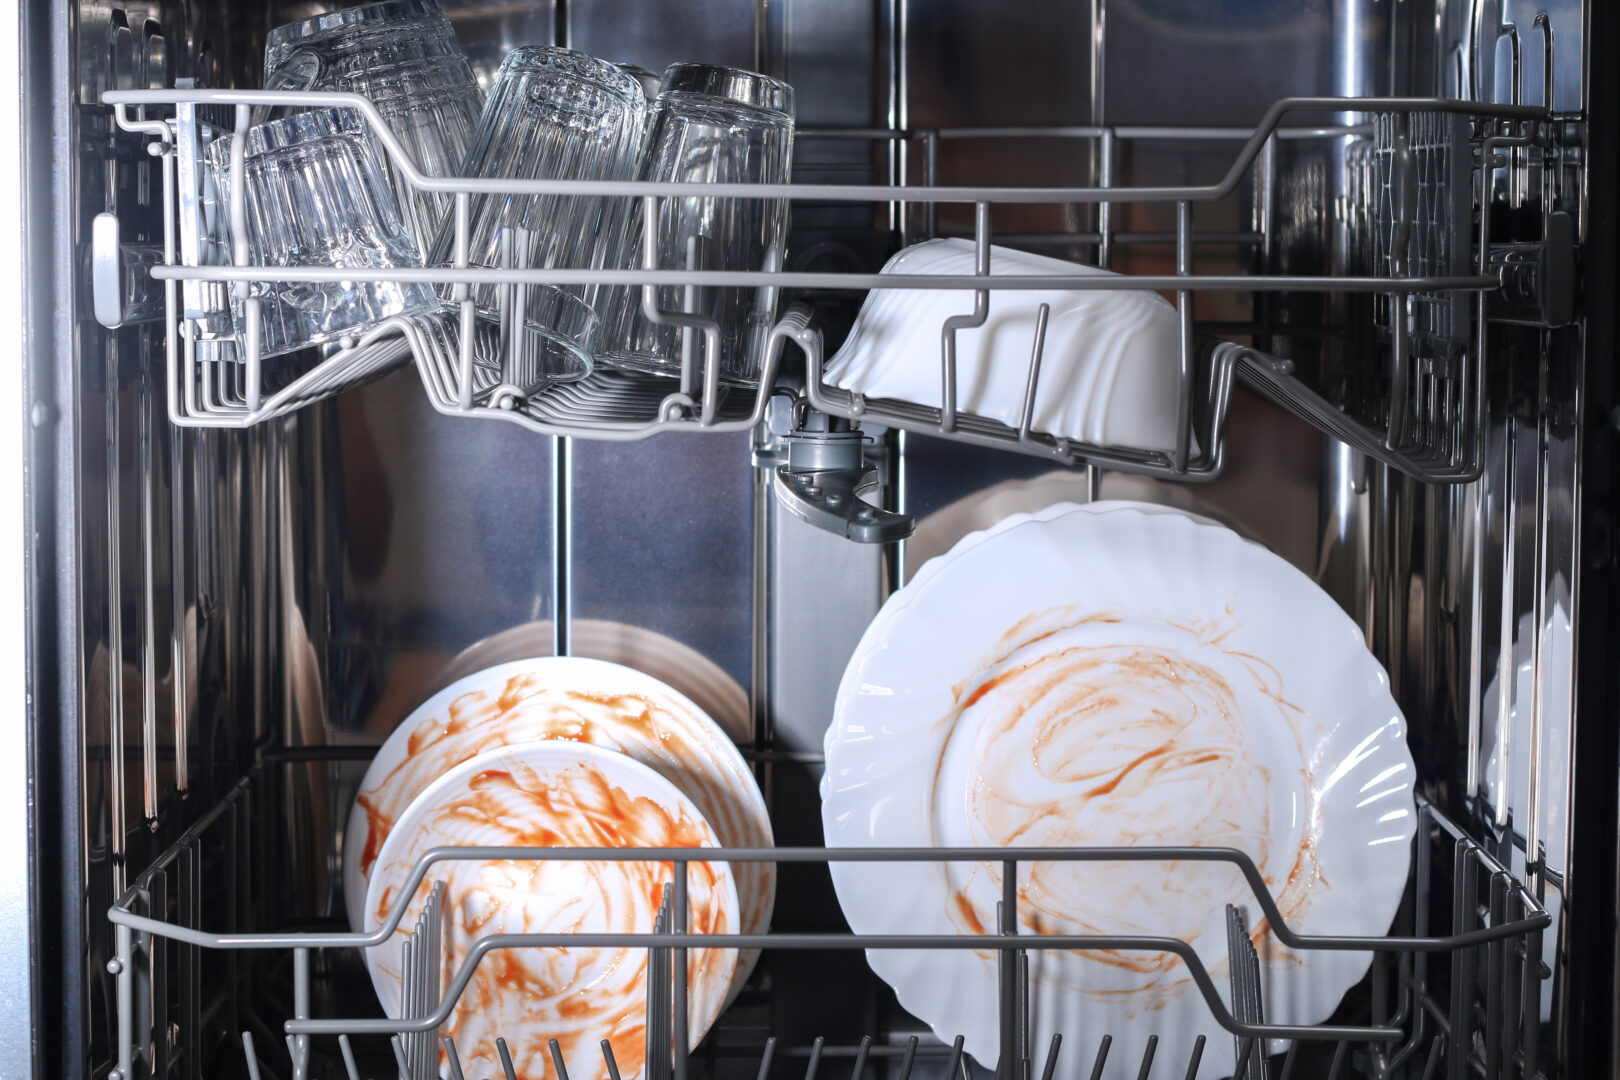 A man loads dirty dishes, plates, spoons, forks, cutlery into the dishwasher tray.